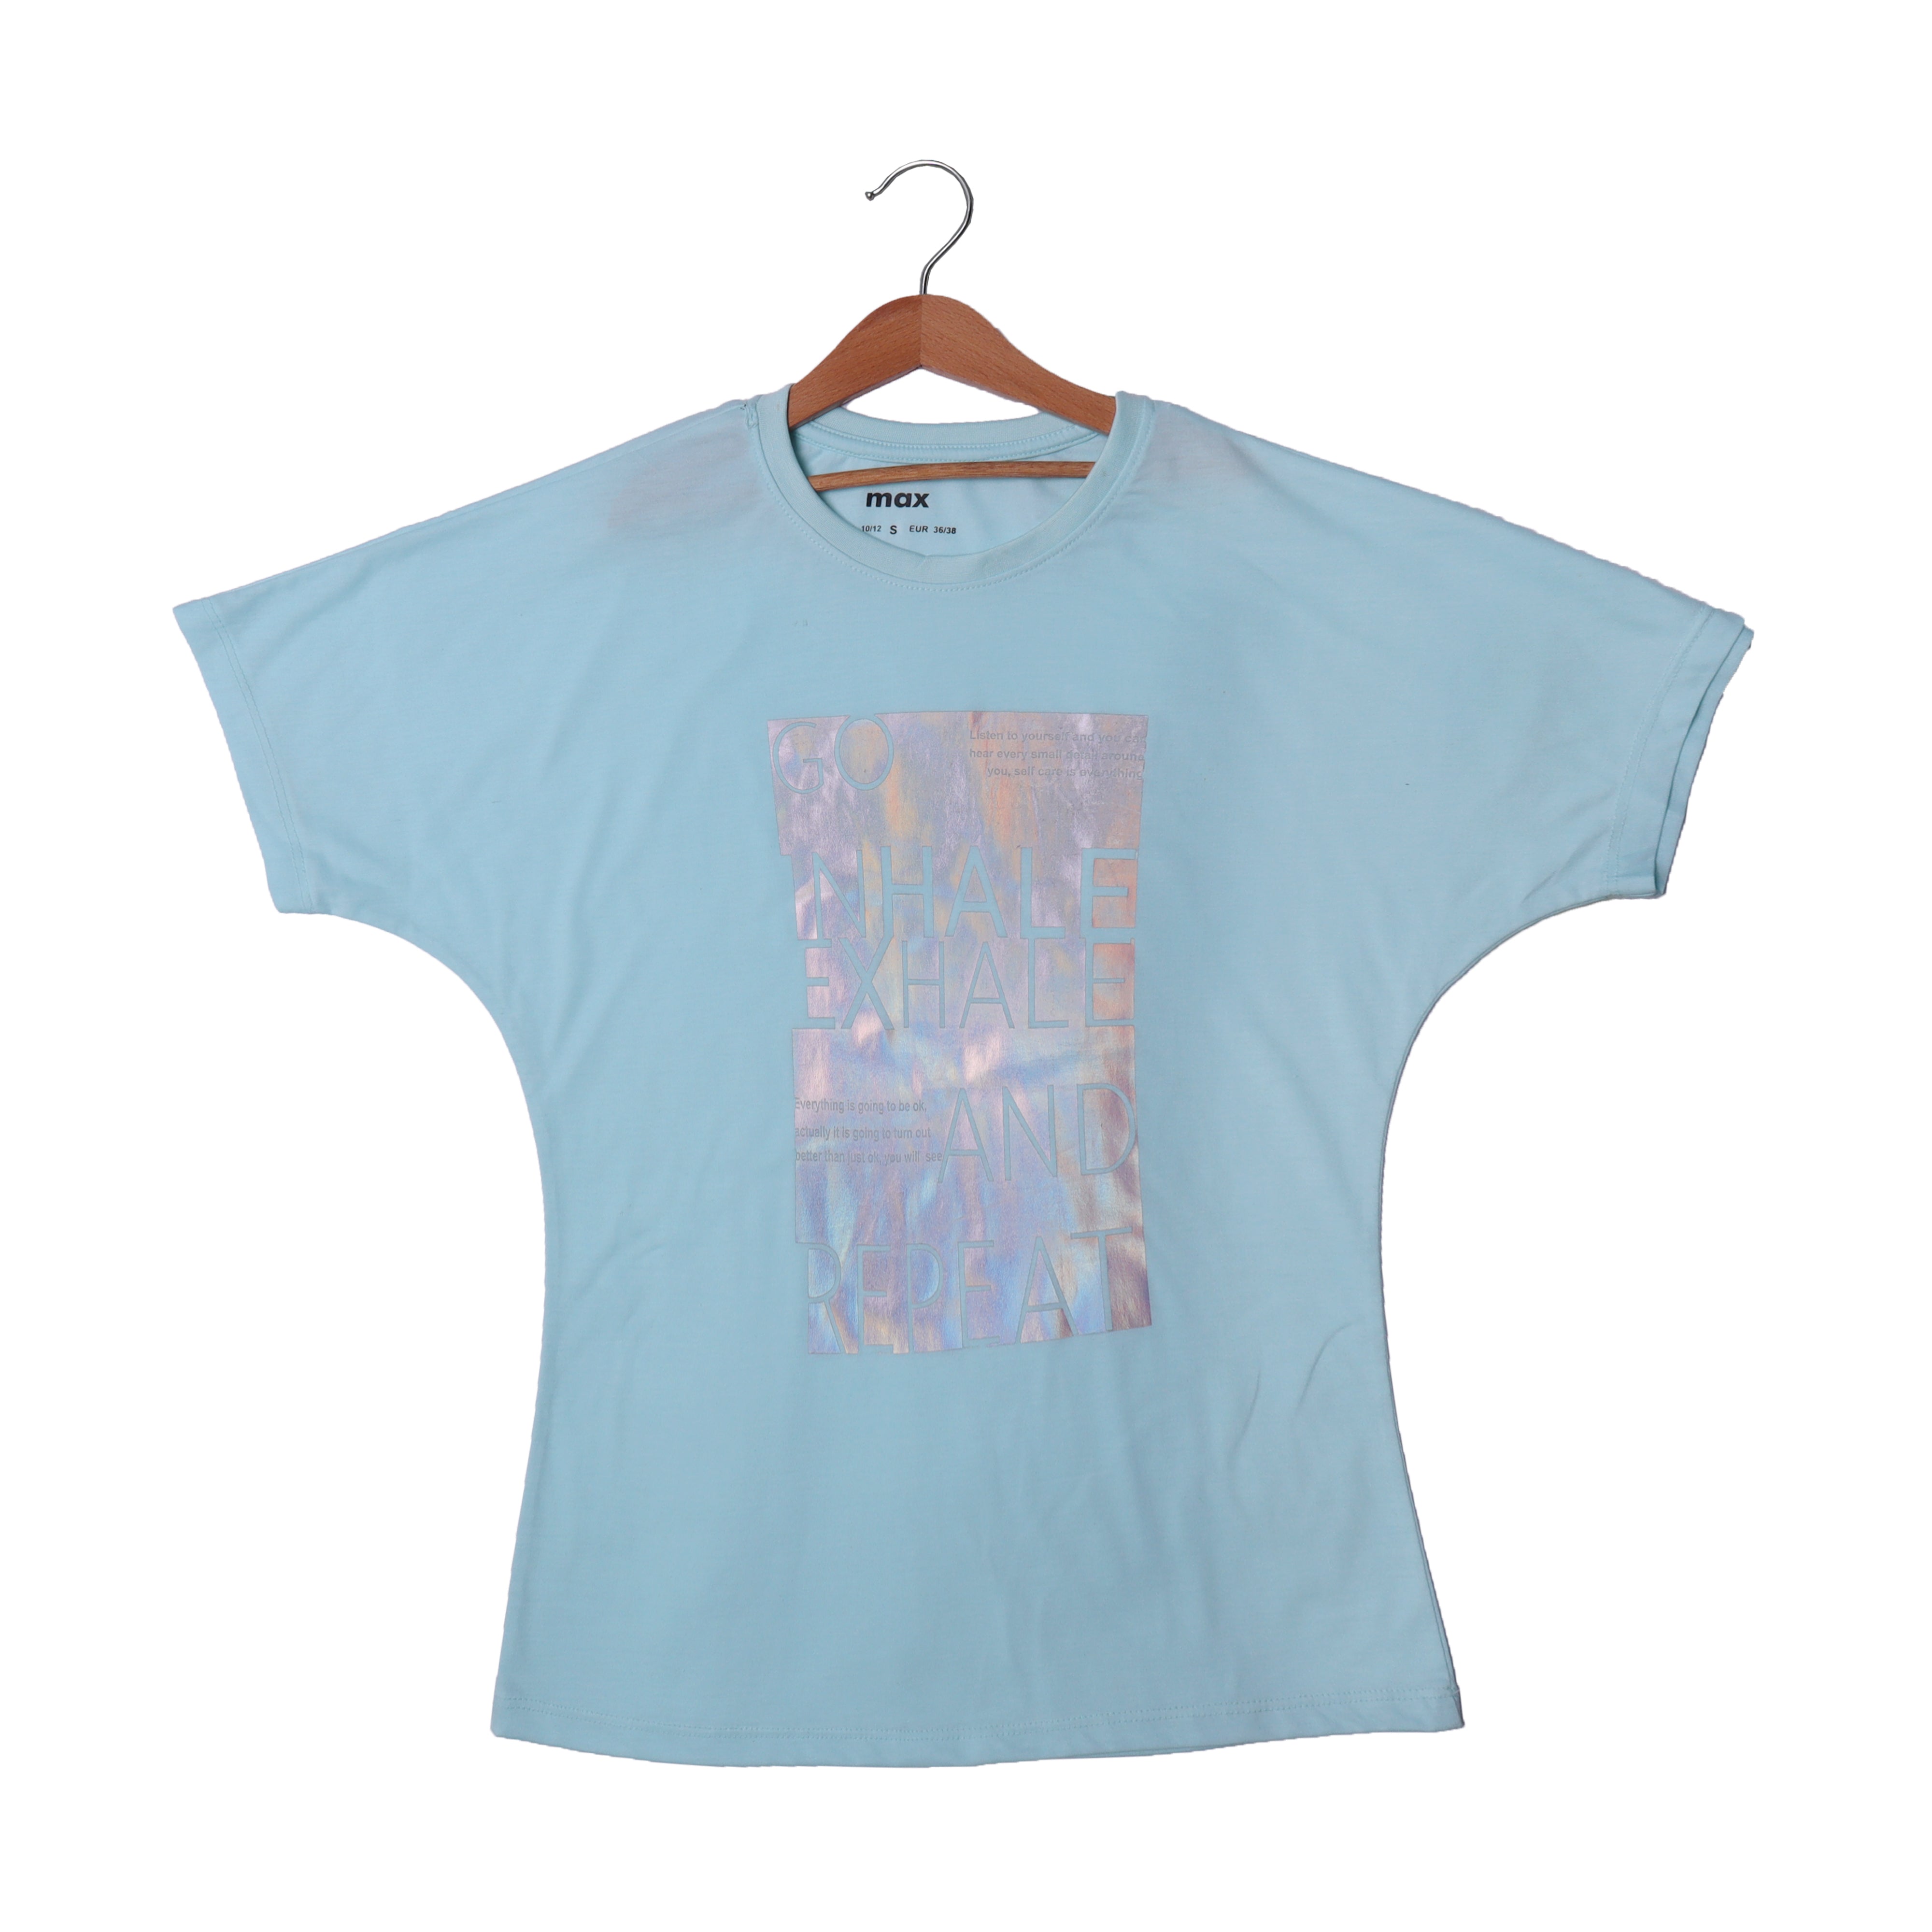 SKY BLUE "GO NHALE EXHATE" PRINTED HALF SLEEVES T-SHIRT FOR WOMEN